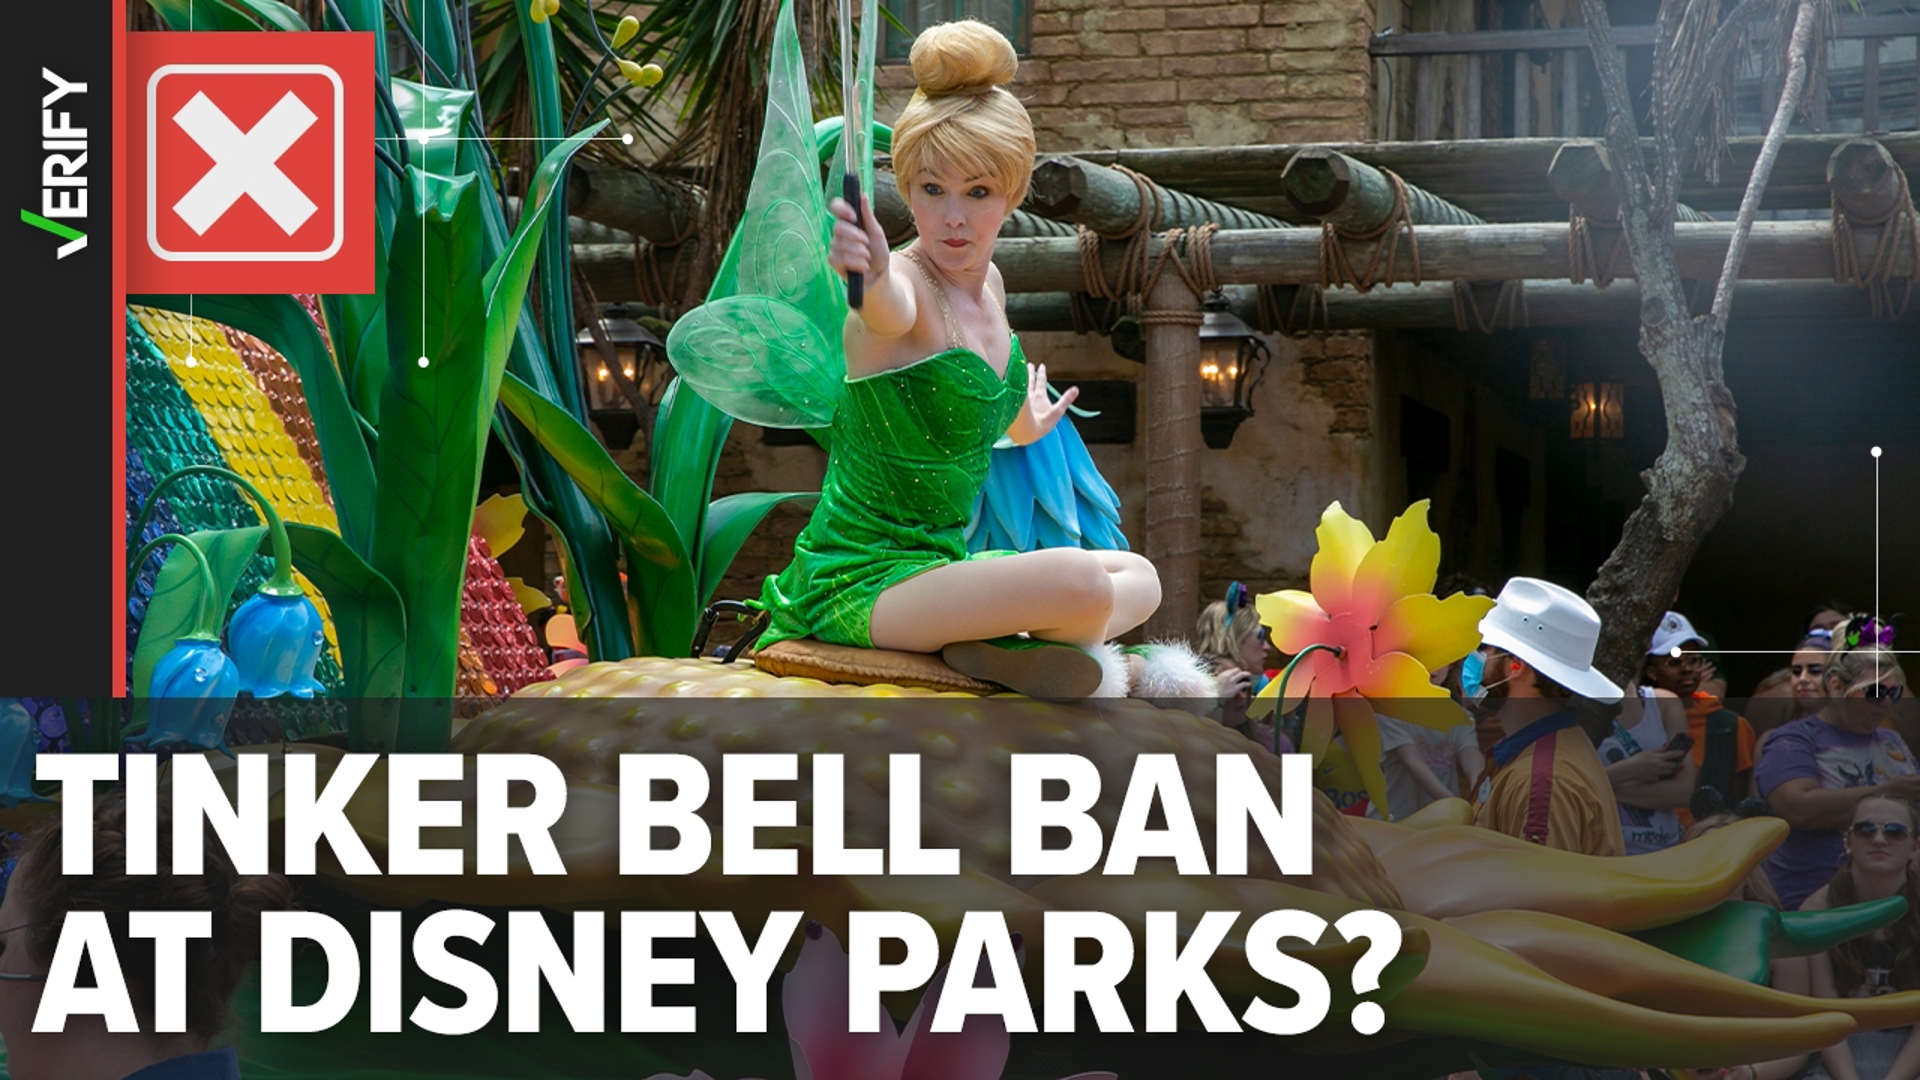 Tinker Bell no longer has a meet-and-greet at Walt Disney World in Orlando, but can still be seen in a variety of other attractions in the park. Tinker Bell still ha